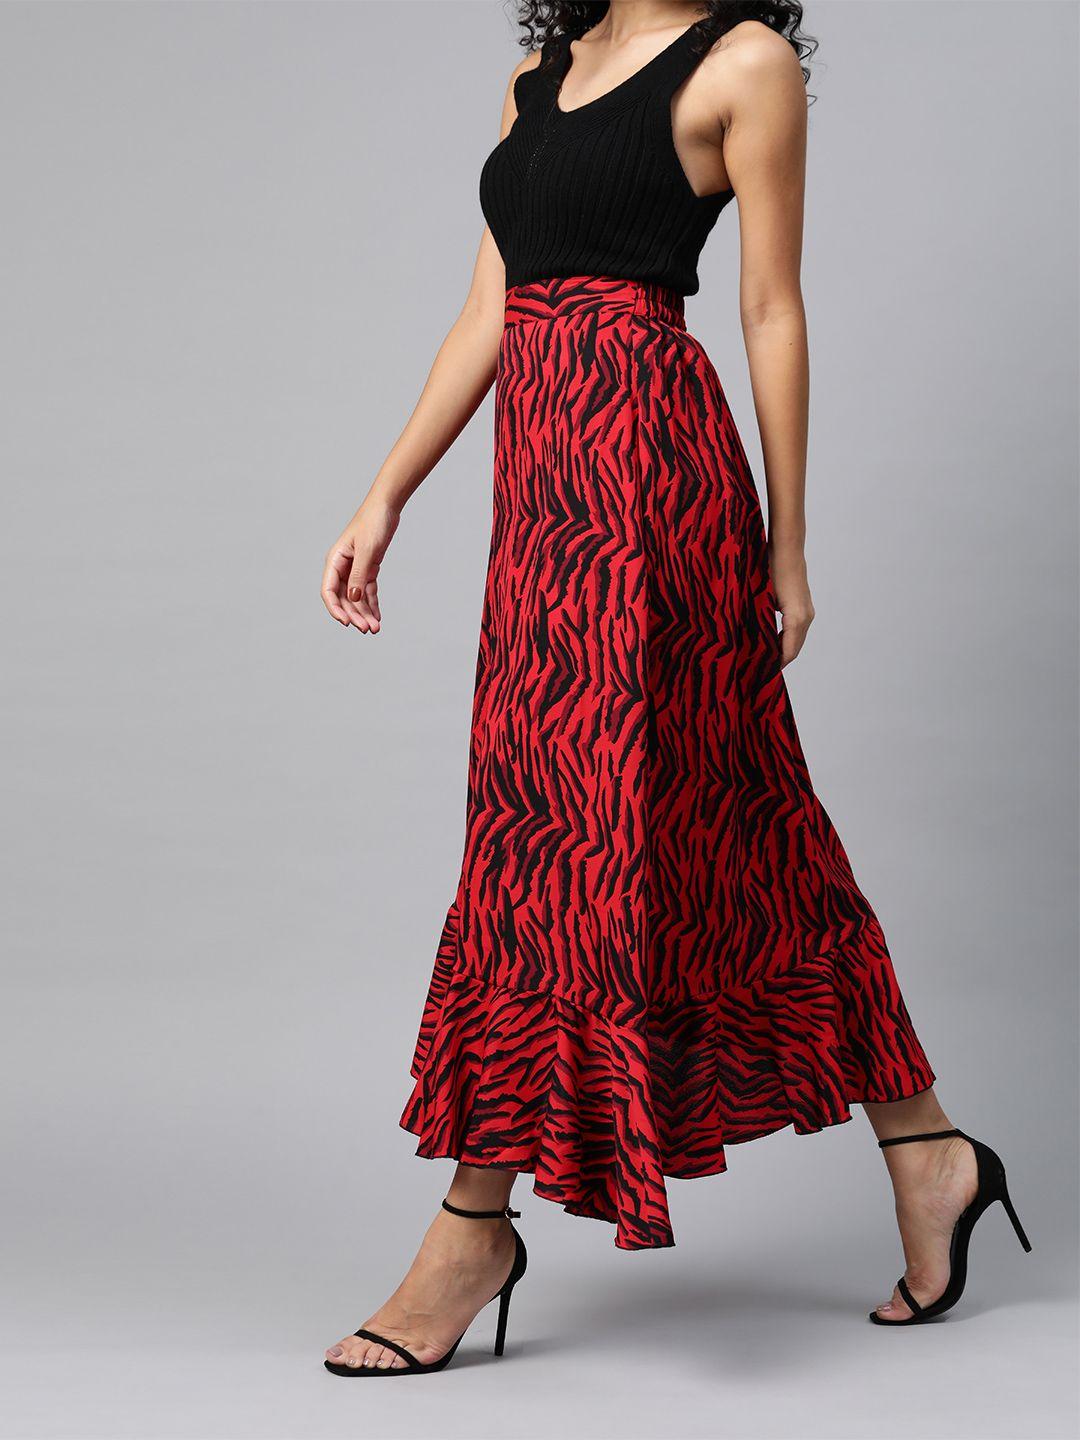 pluss gorgeous red and black animal printed a-line maxi skirt